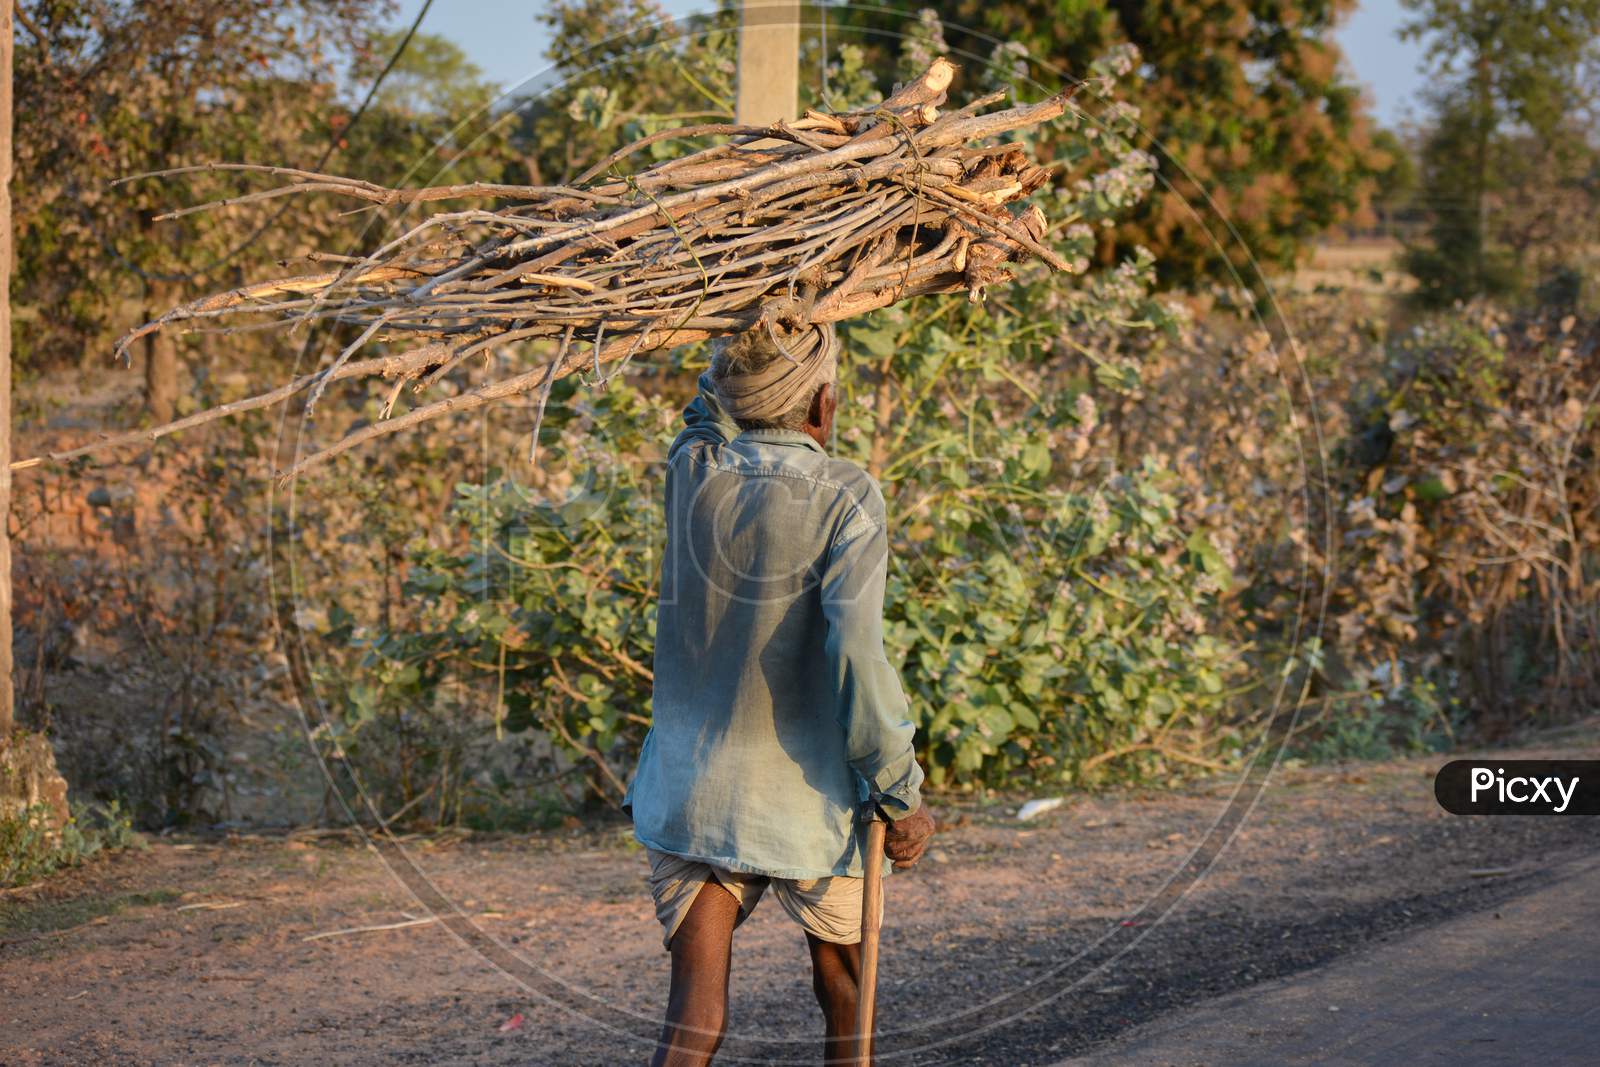 TIKAMGARH, MADHYA PRADESH, INDIA - MARCH 24, 2020: Unidentified rural old age man carrying firewood on road.